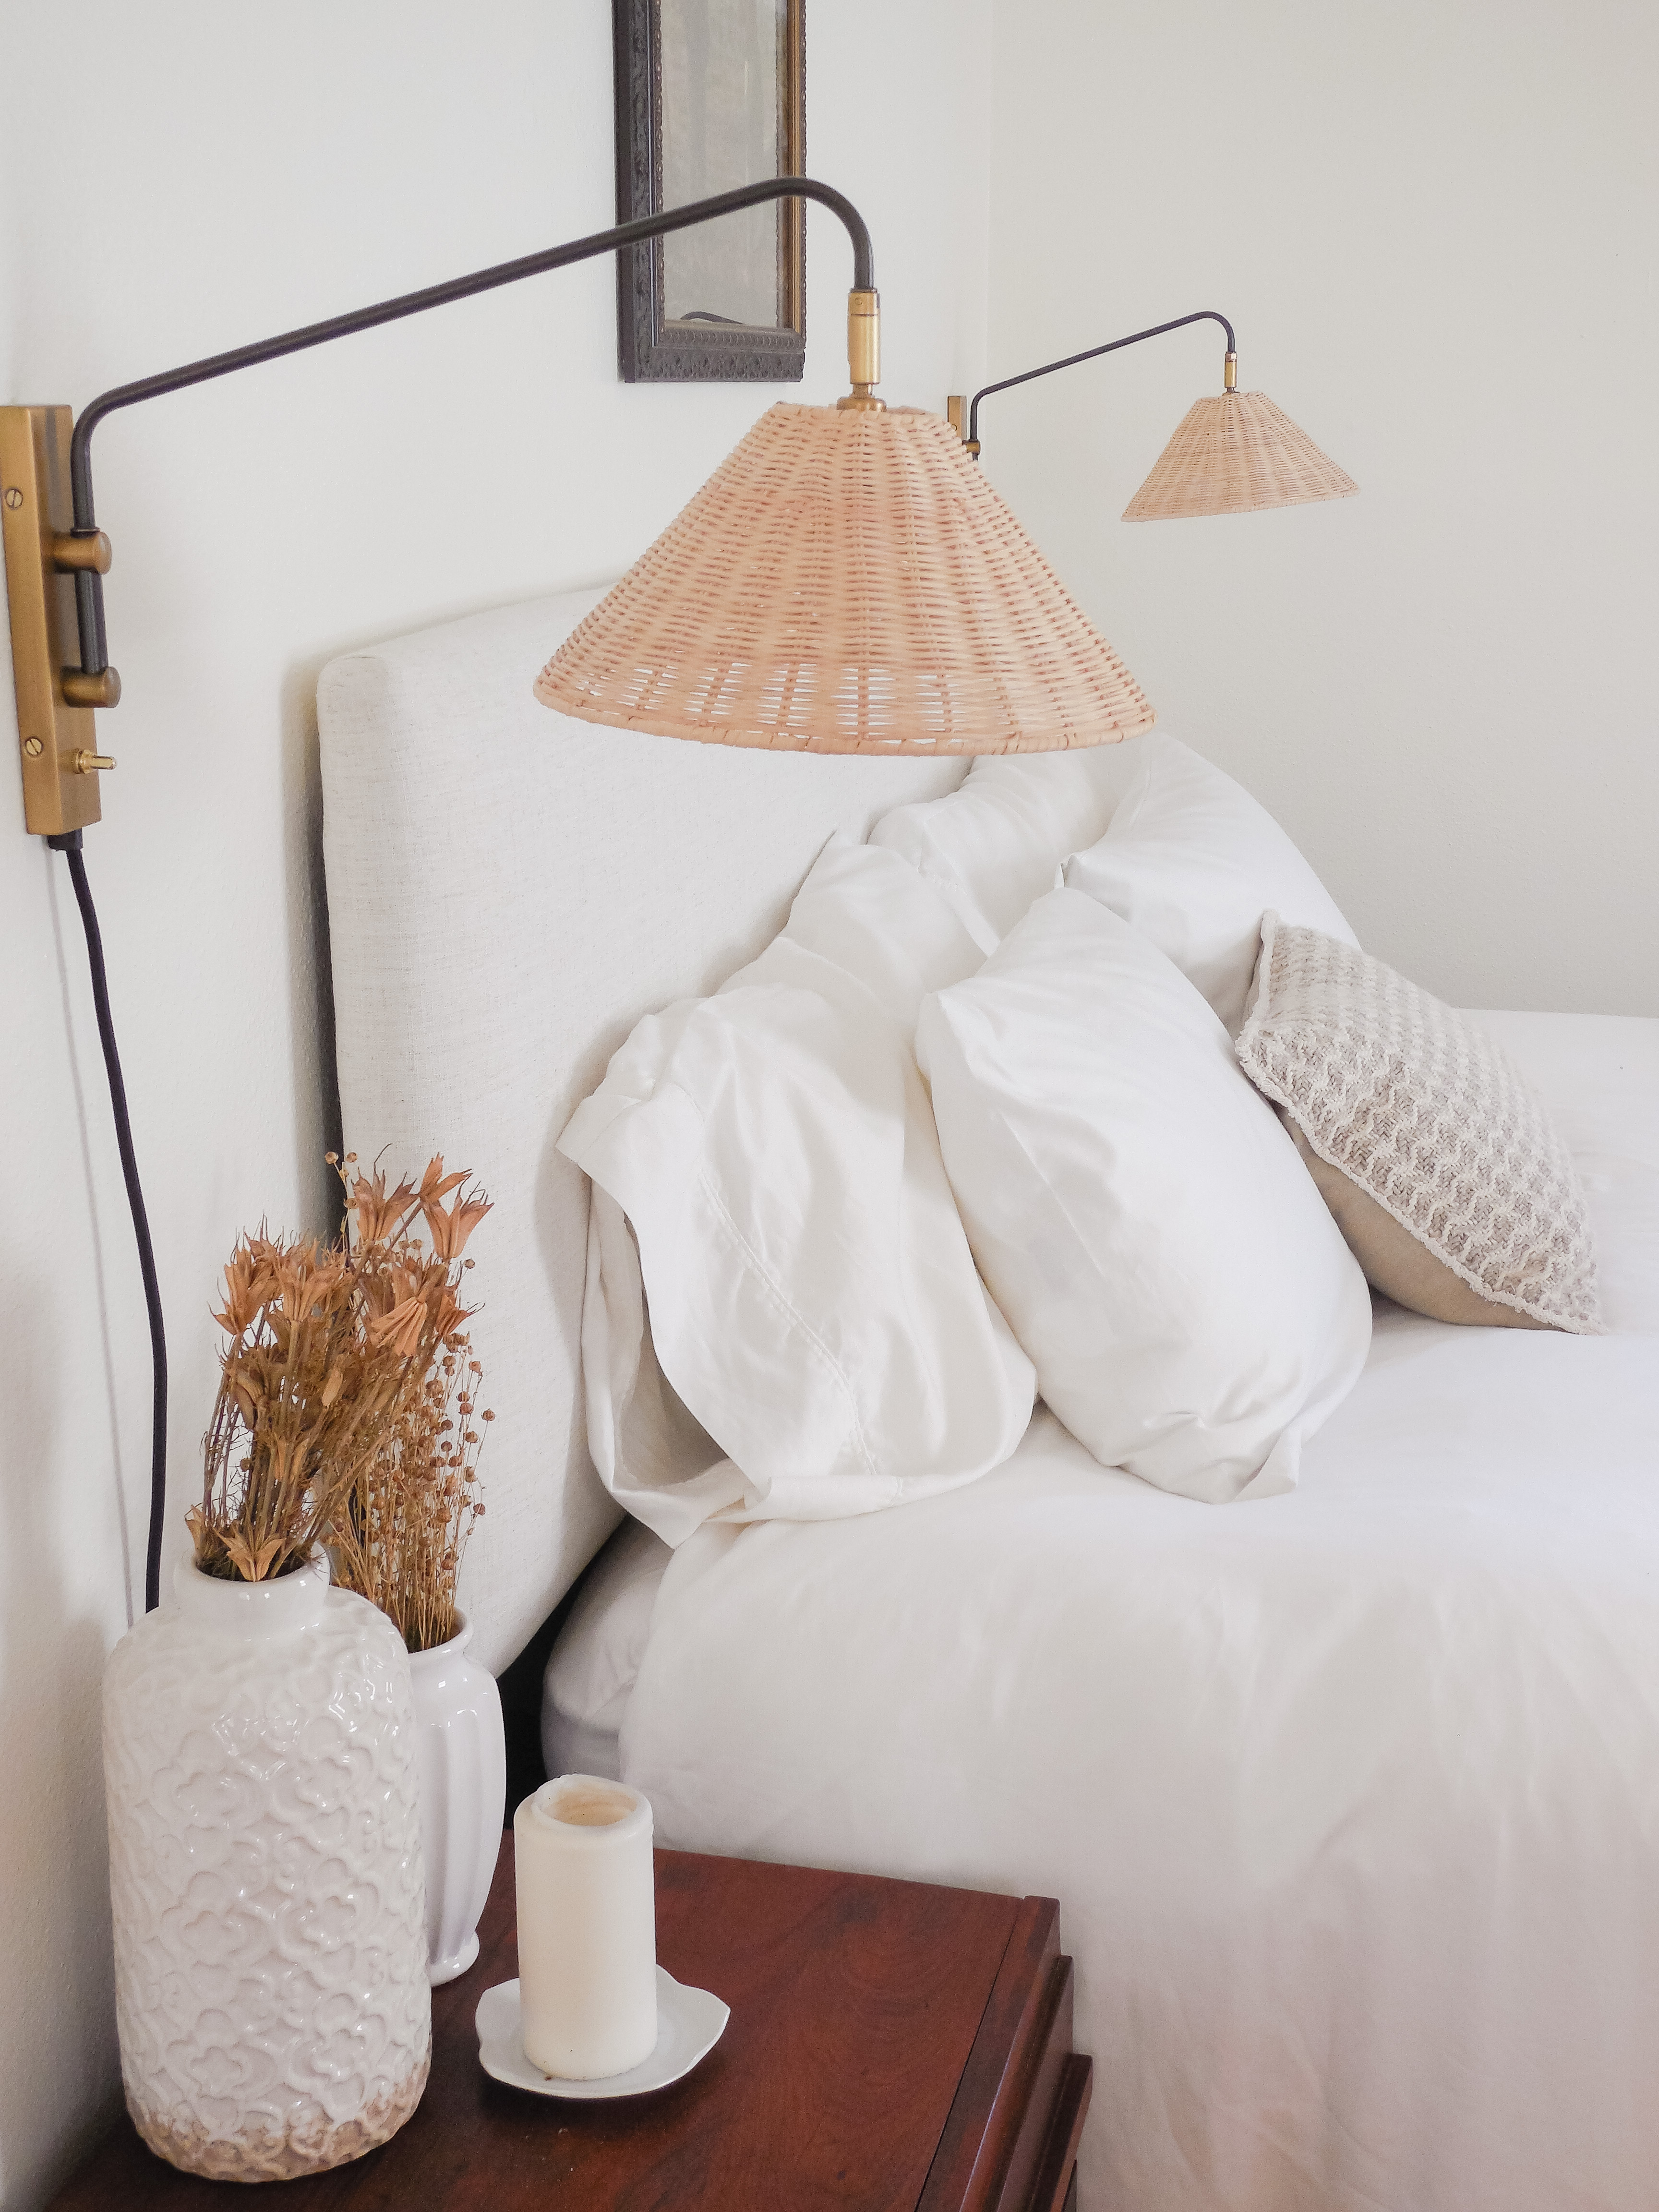 All about the nightstand